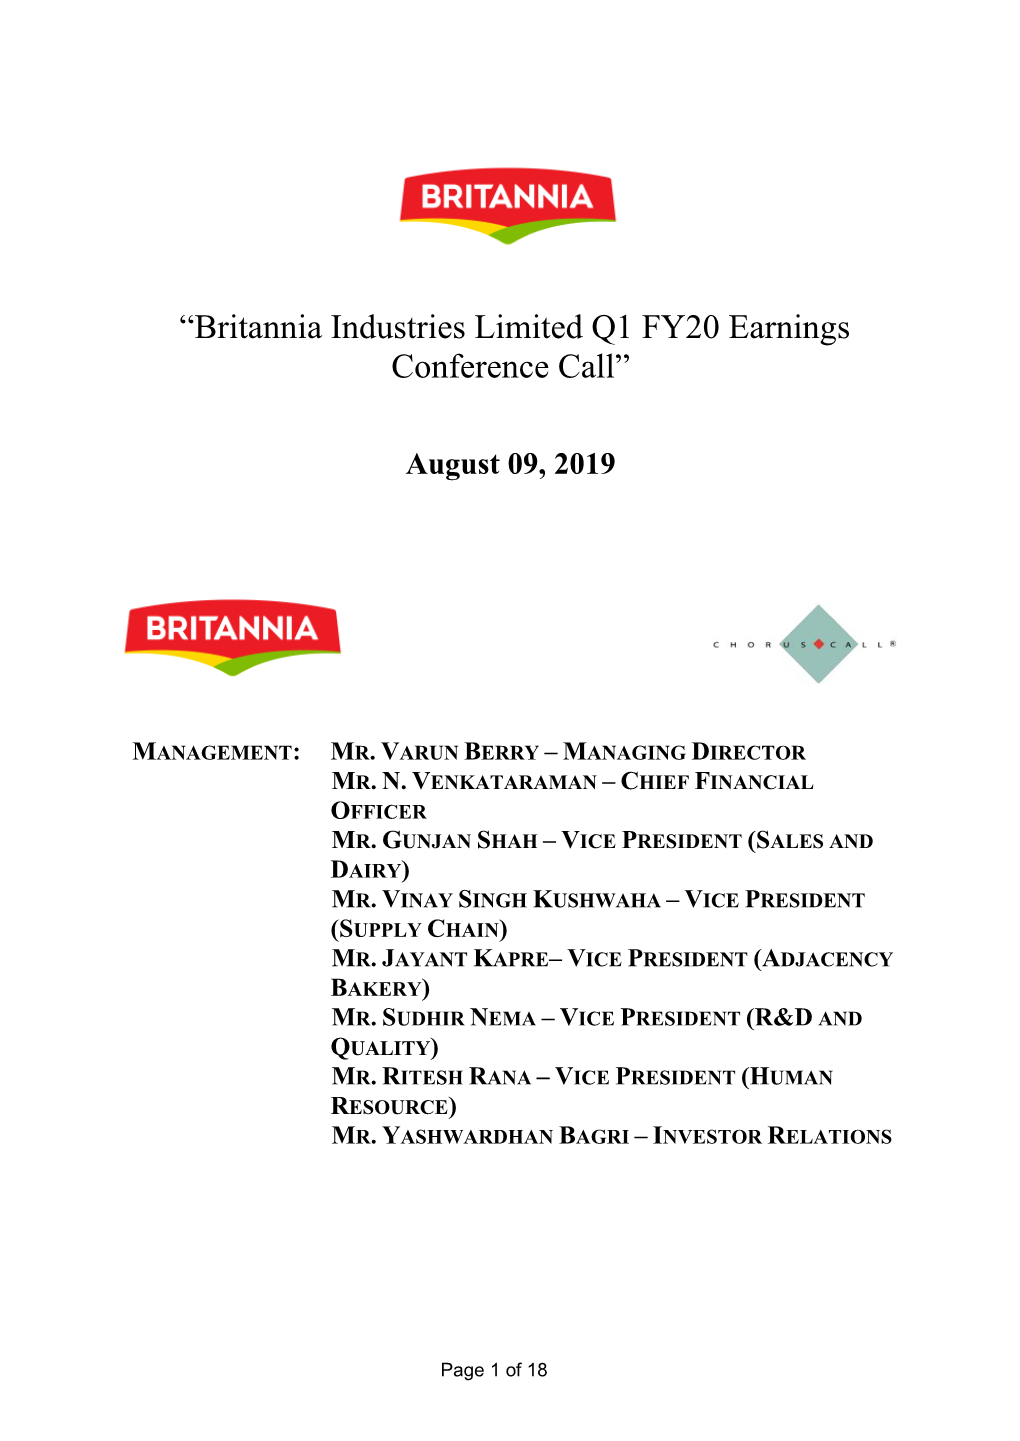 “Britannia Industries Limited Q1 FY20 Earnings Conference Call”